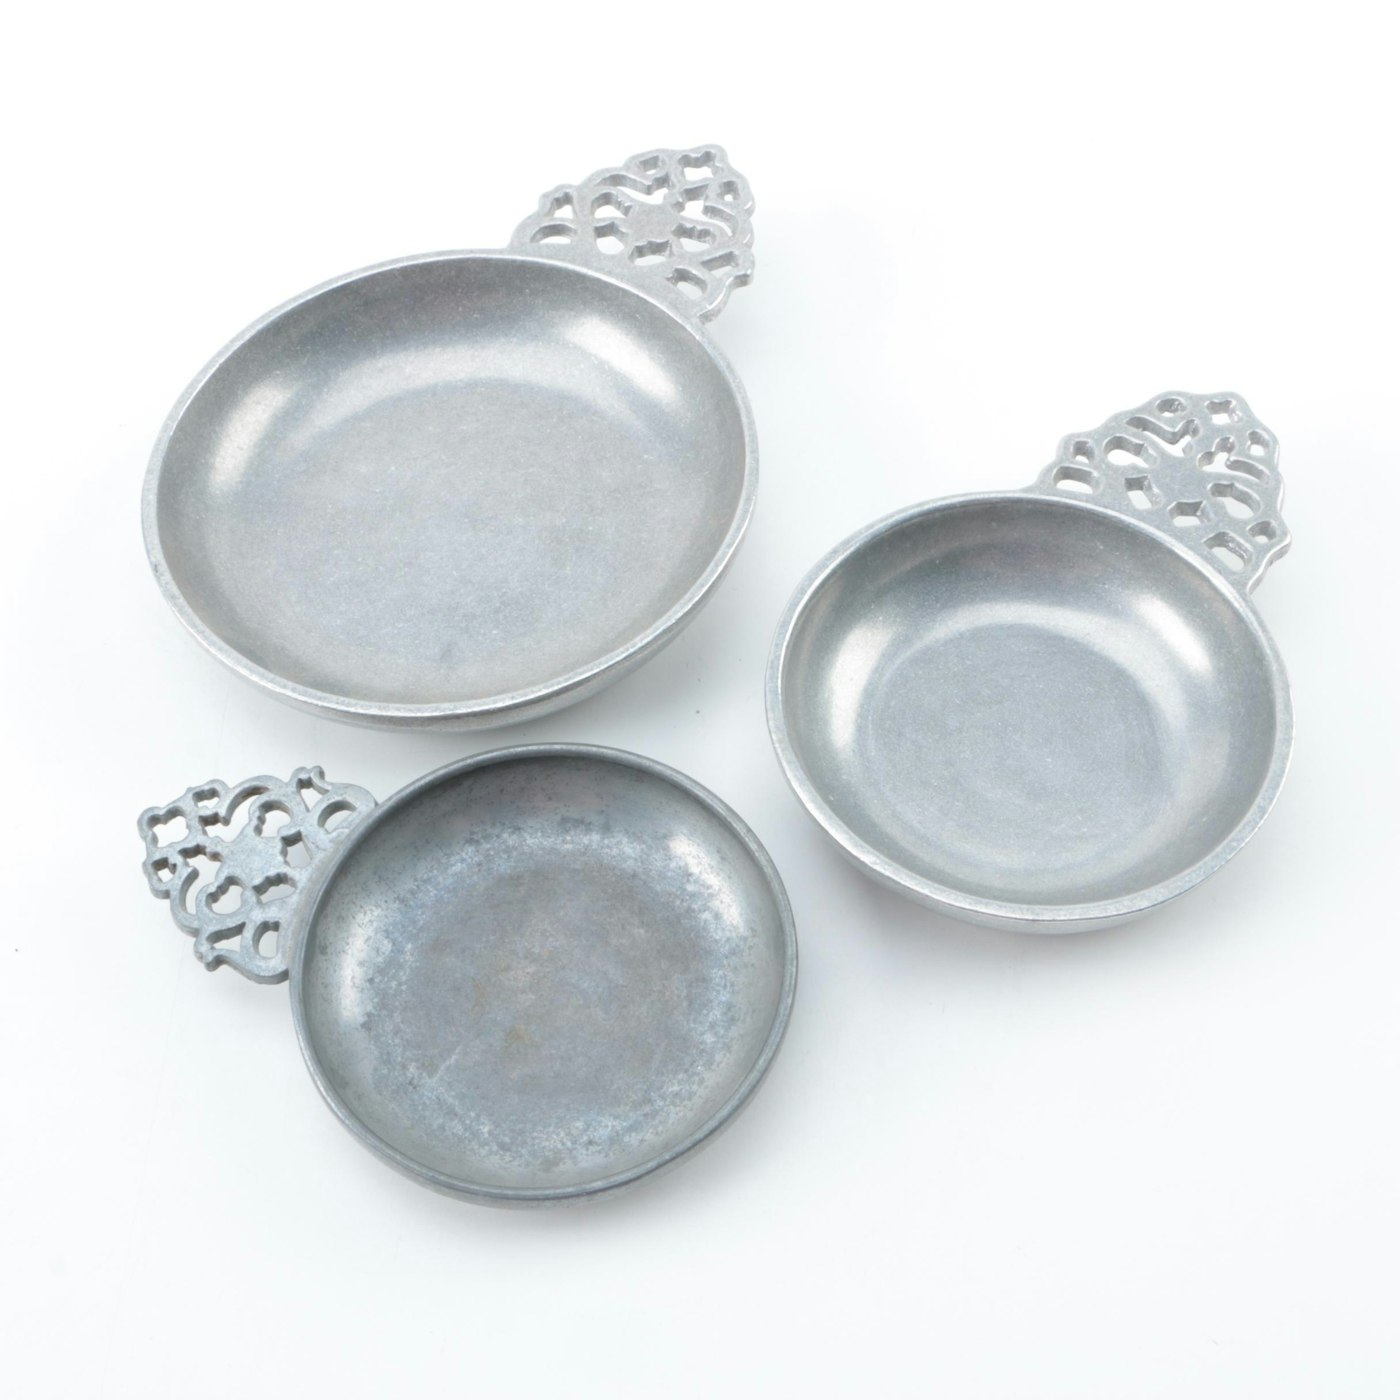 Pewter Tableware Including Carson, Pew-Ta-Rex, Insico, Stede and